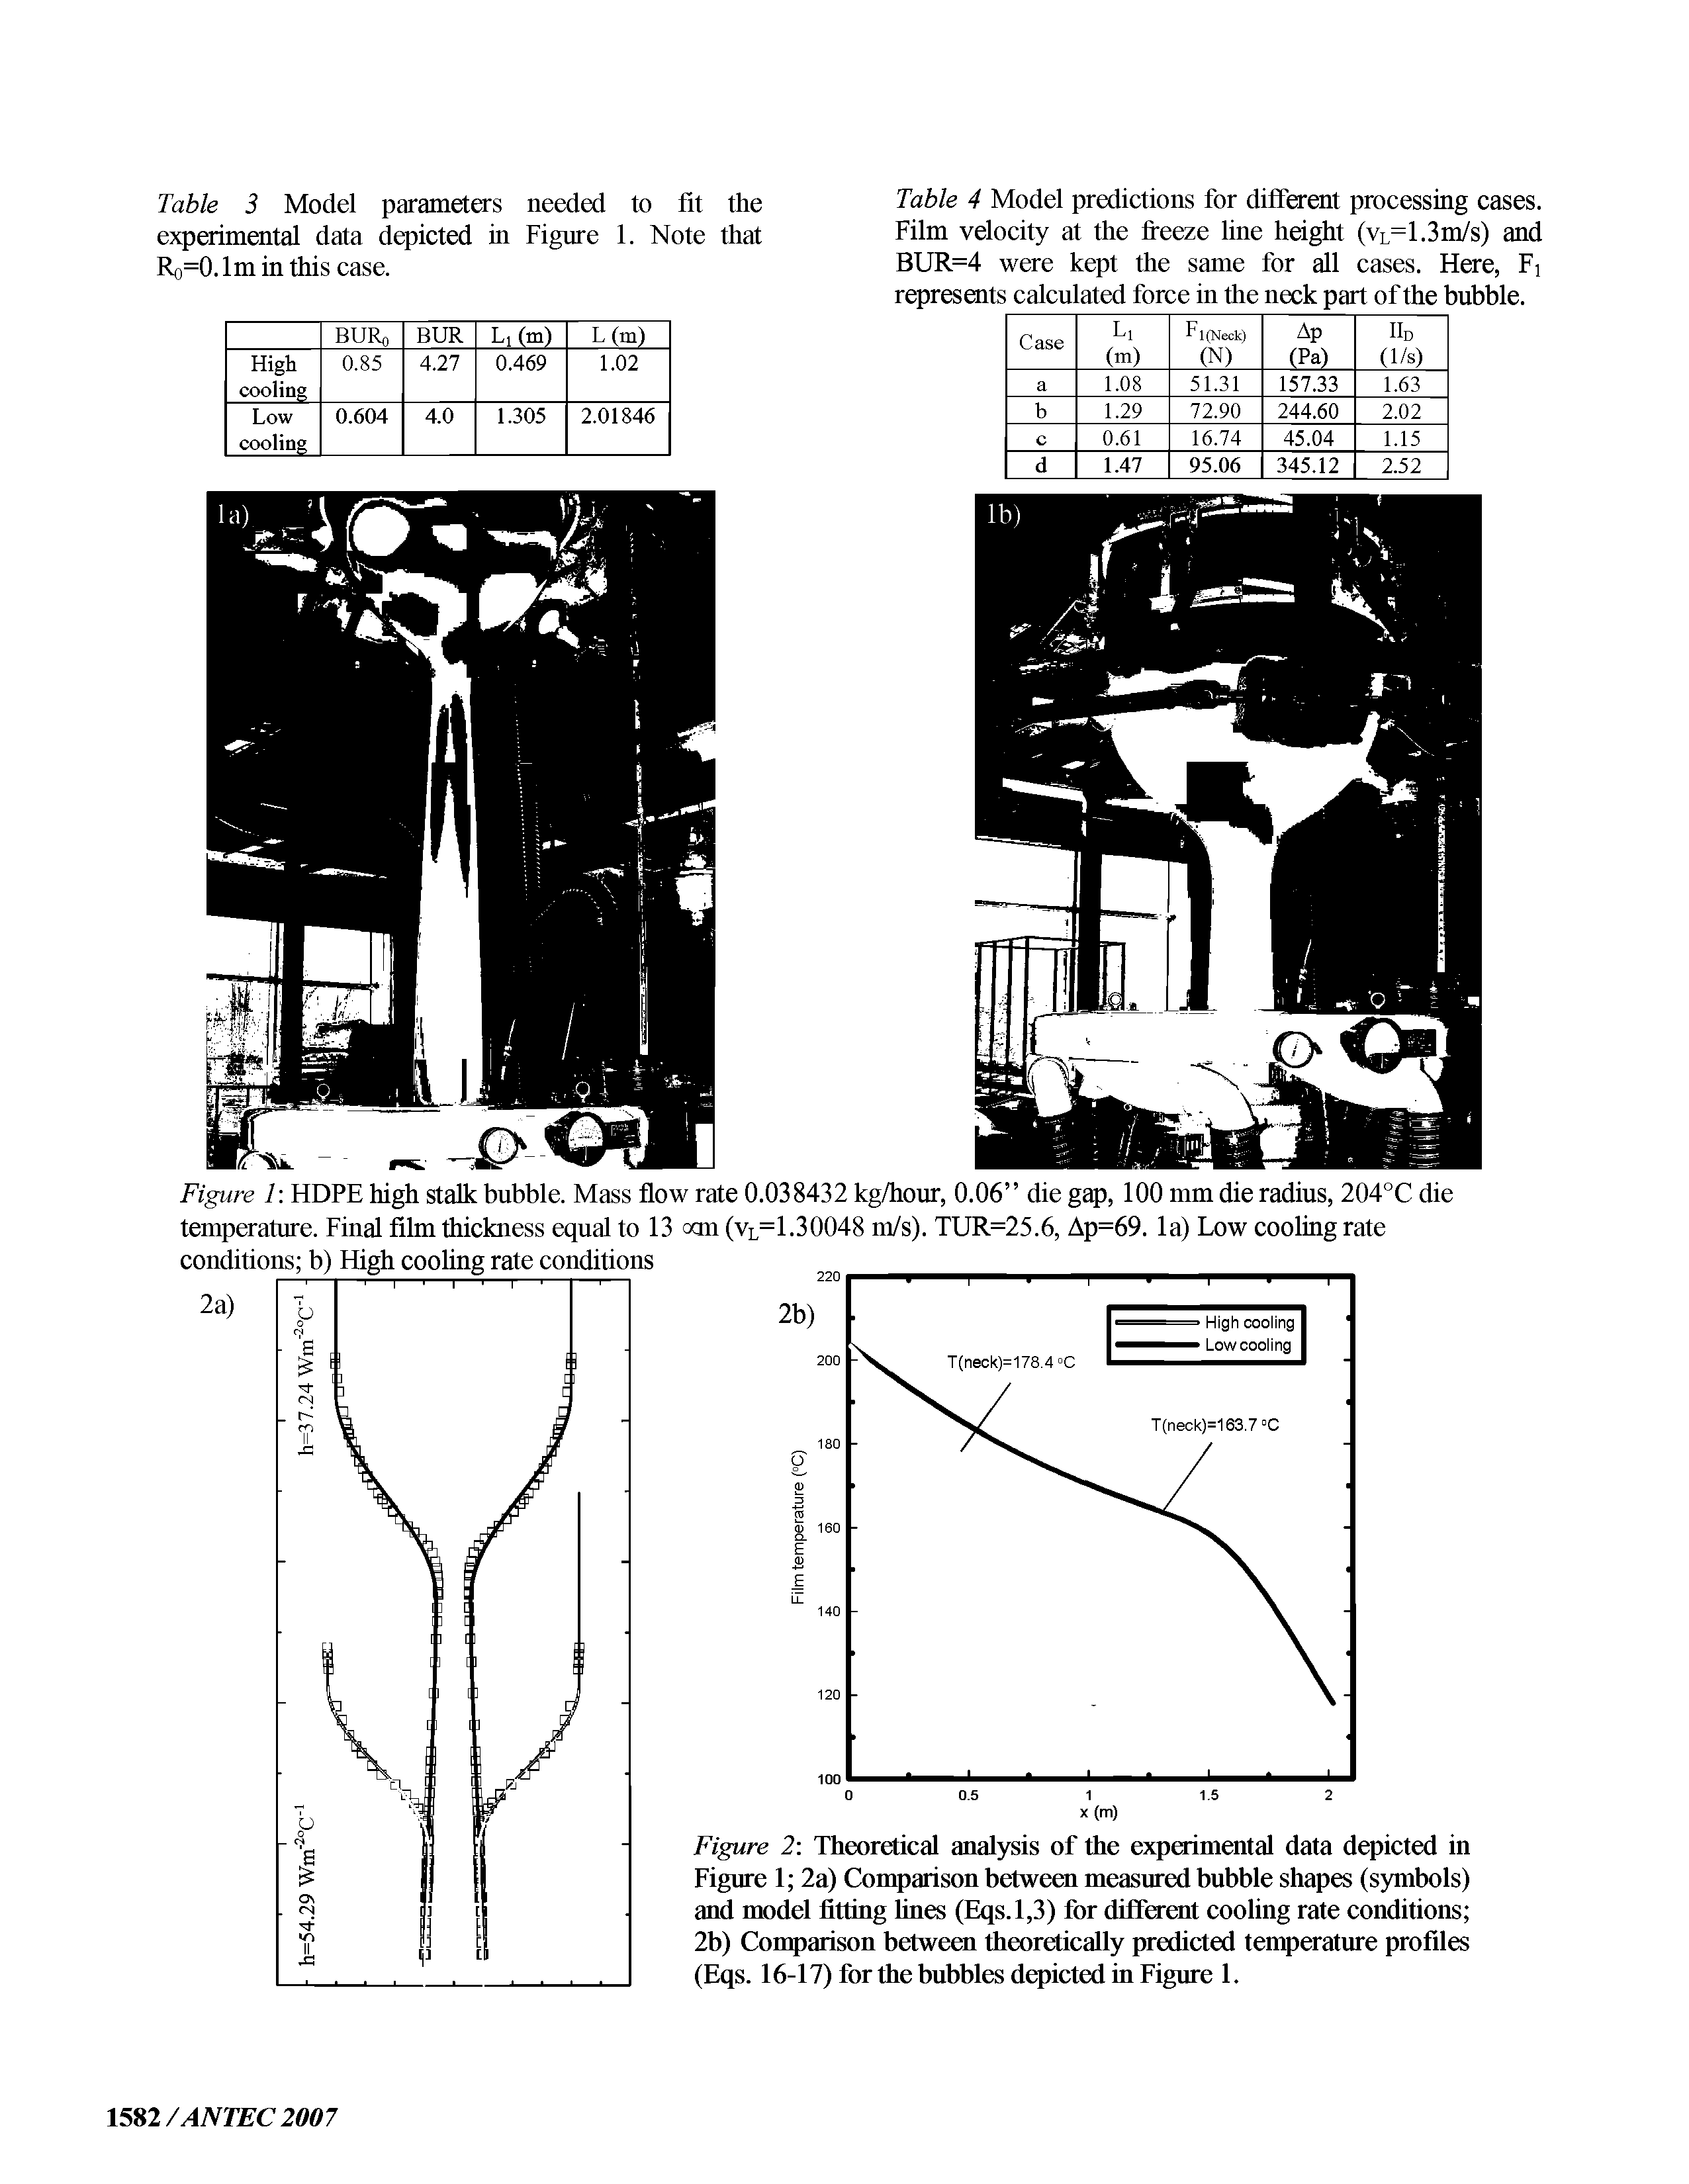 Figure 2 Theoretical analysis of the experimental data depicted in Figure 1 2a) Comparison between measured bubble shapes (symbols) and model fitting lines (Eqs.1,3) for difierent cooling rate conditions 2b) Comparison between toeoretically predicted temperature profiles (Eqs. 16-17) for the bubbles depicted in Figure 1.